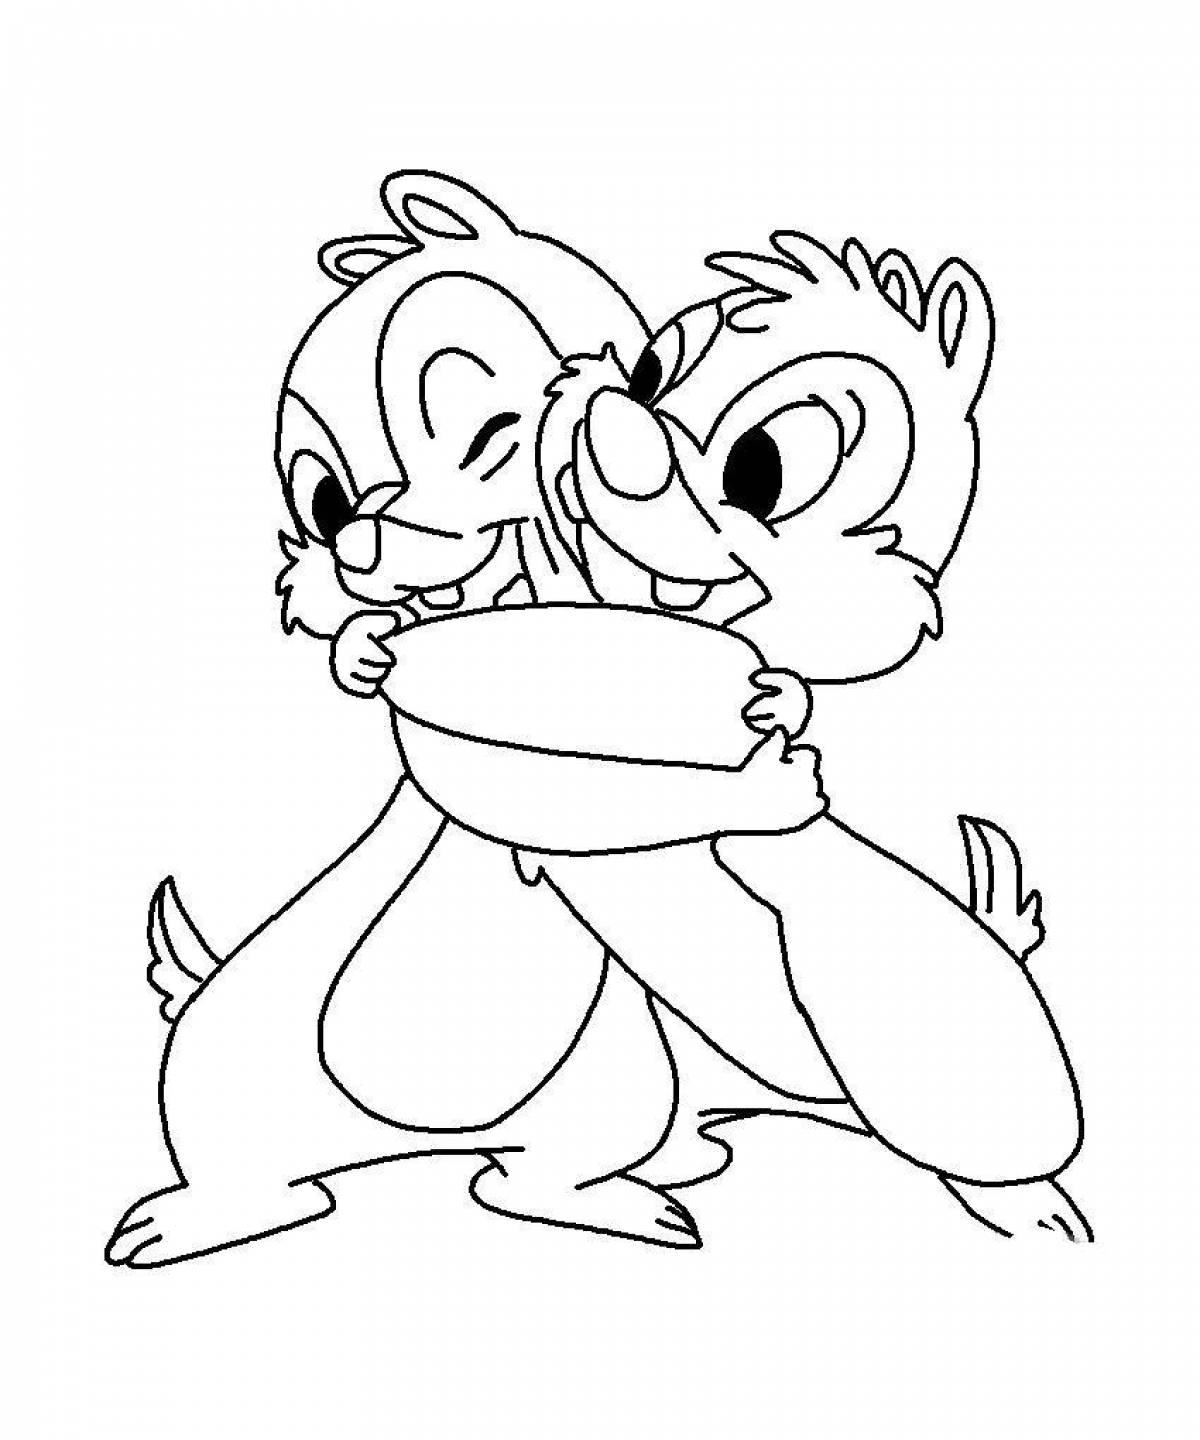 Cozy hug coloring pages